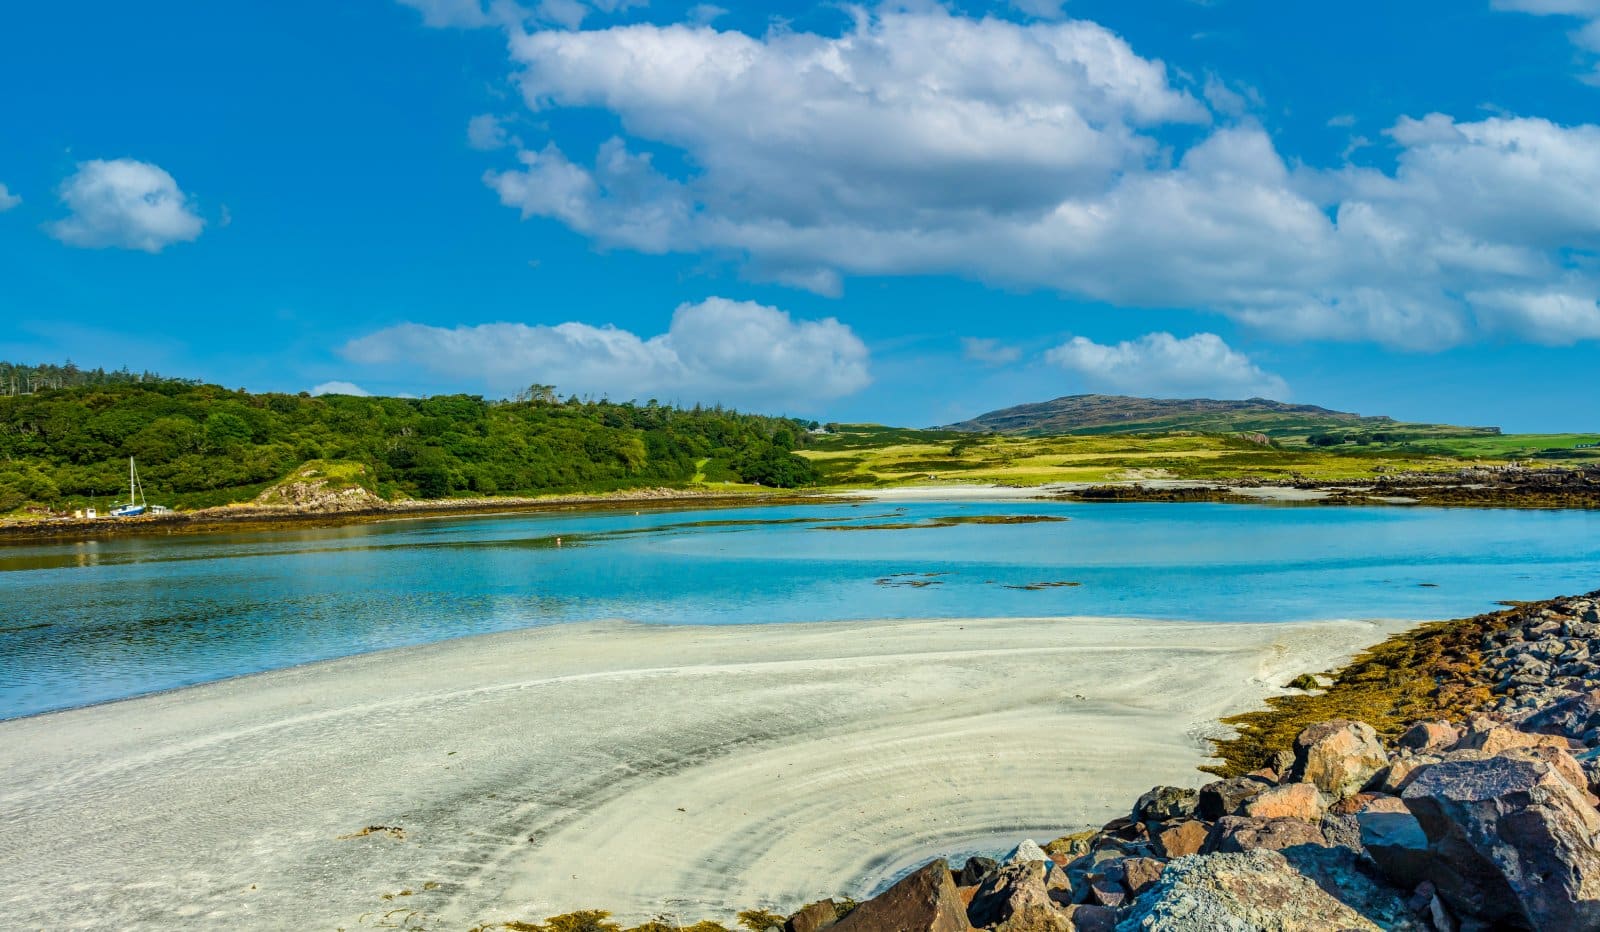 <p class="wp-caption-text">Image Credit: Shutterstock / Anne Coatesy</p>  <p><span>The Isle of Eigg, part of the Inner Hebrides, is a community-owned island known for its innovative approach to sustainable living and renewable energy. Eigg’s residents have created a self-sufficient community that relies on solar, wind, and hydropower, setting an example for renewable energy usage worldwide.</span></p>